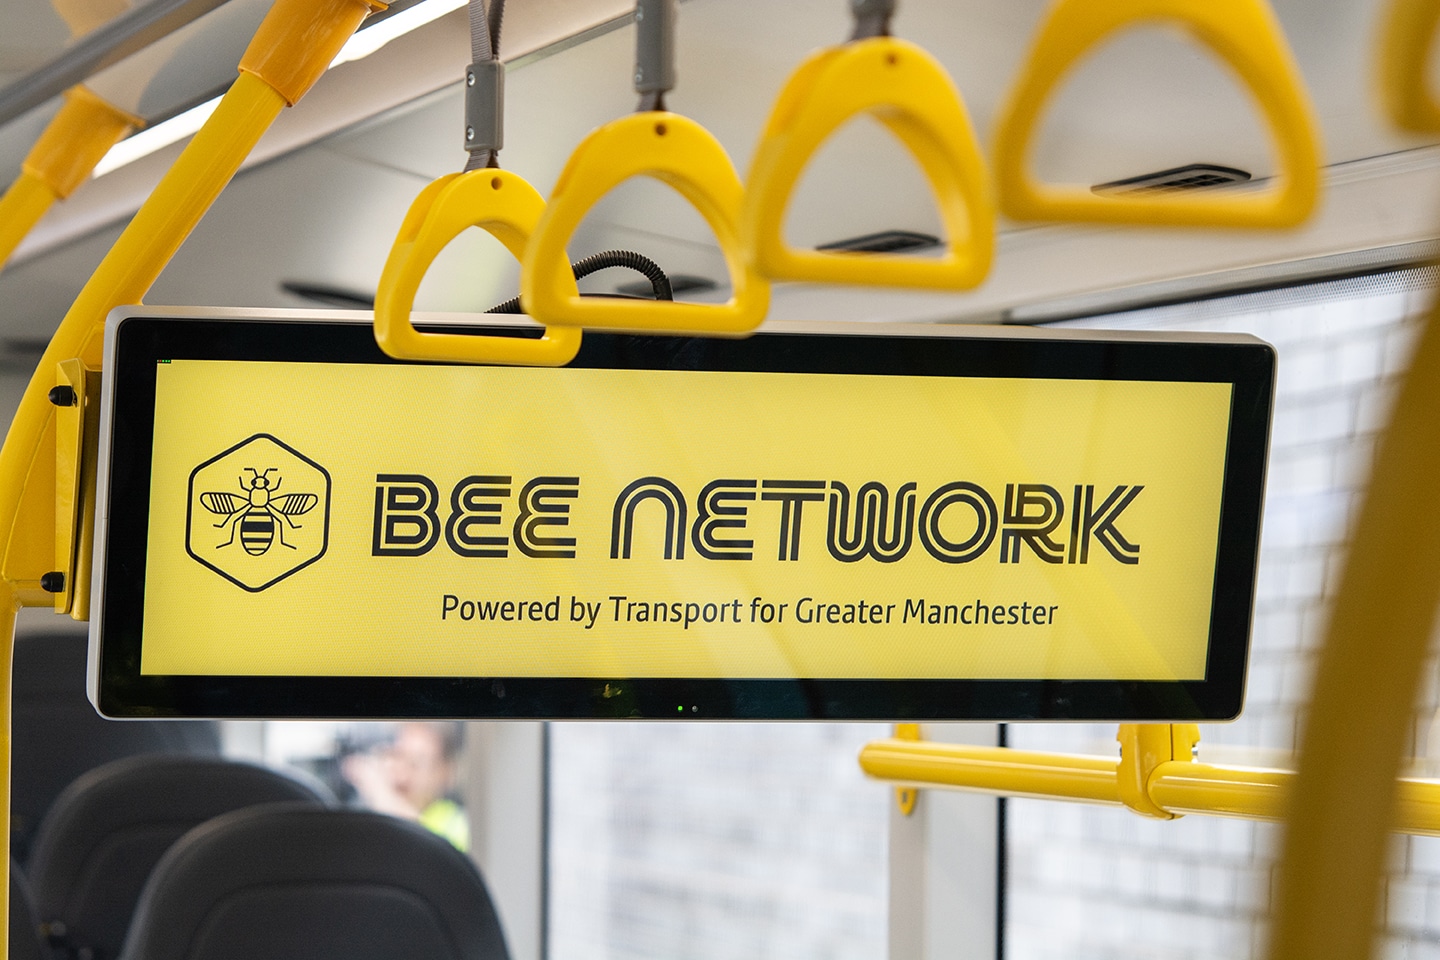 bee-network-bus-info-sign-integrated-rail-network